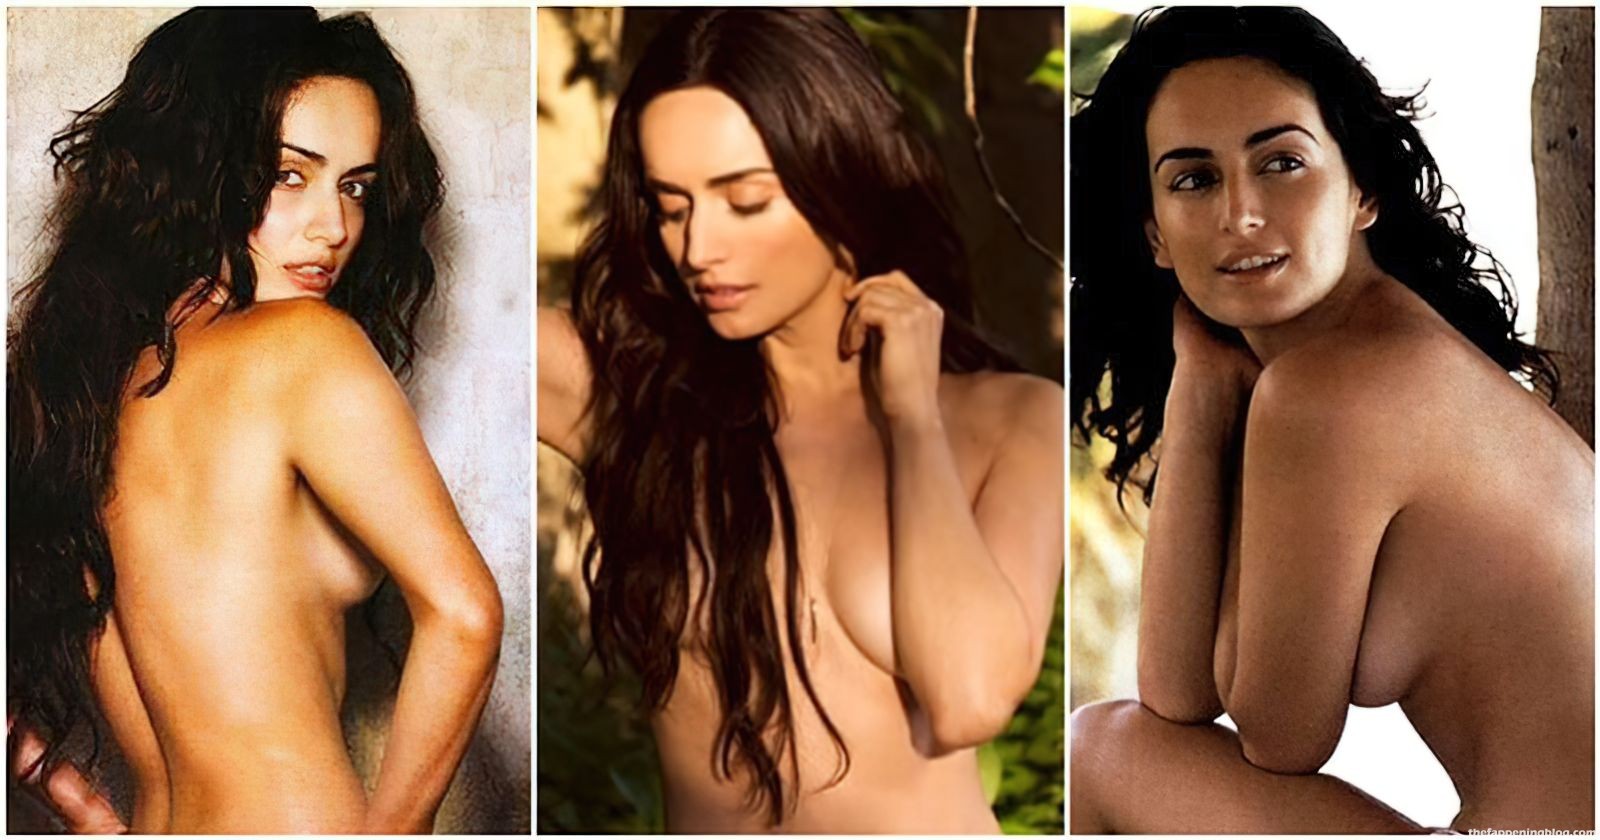 Check out the hot Mexican model and actress Ana de la Reguera’s nude and se...